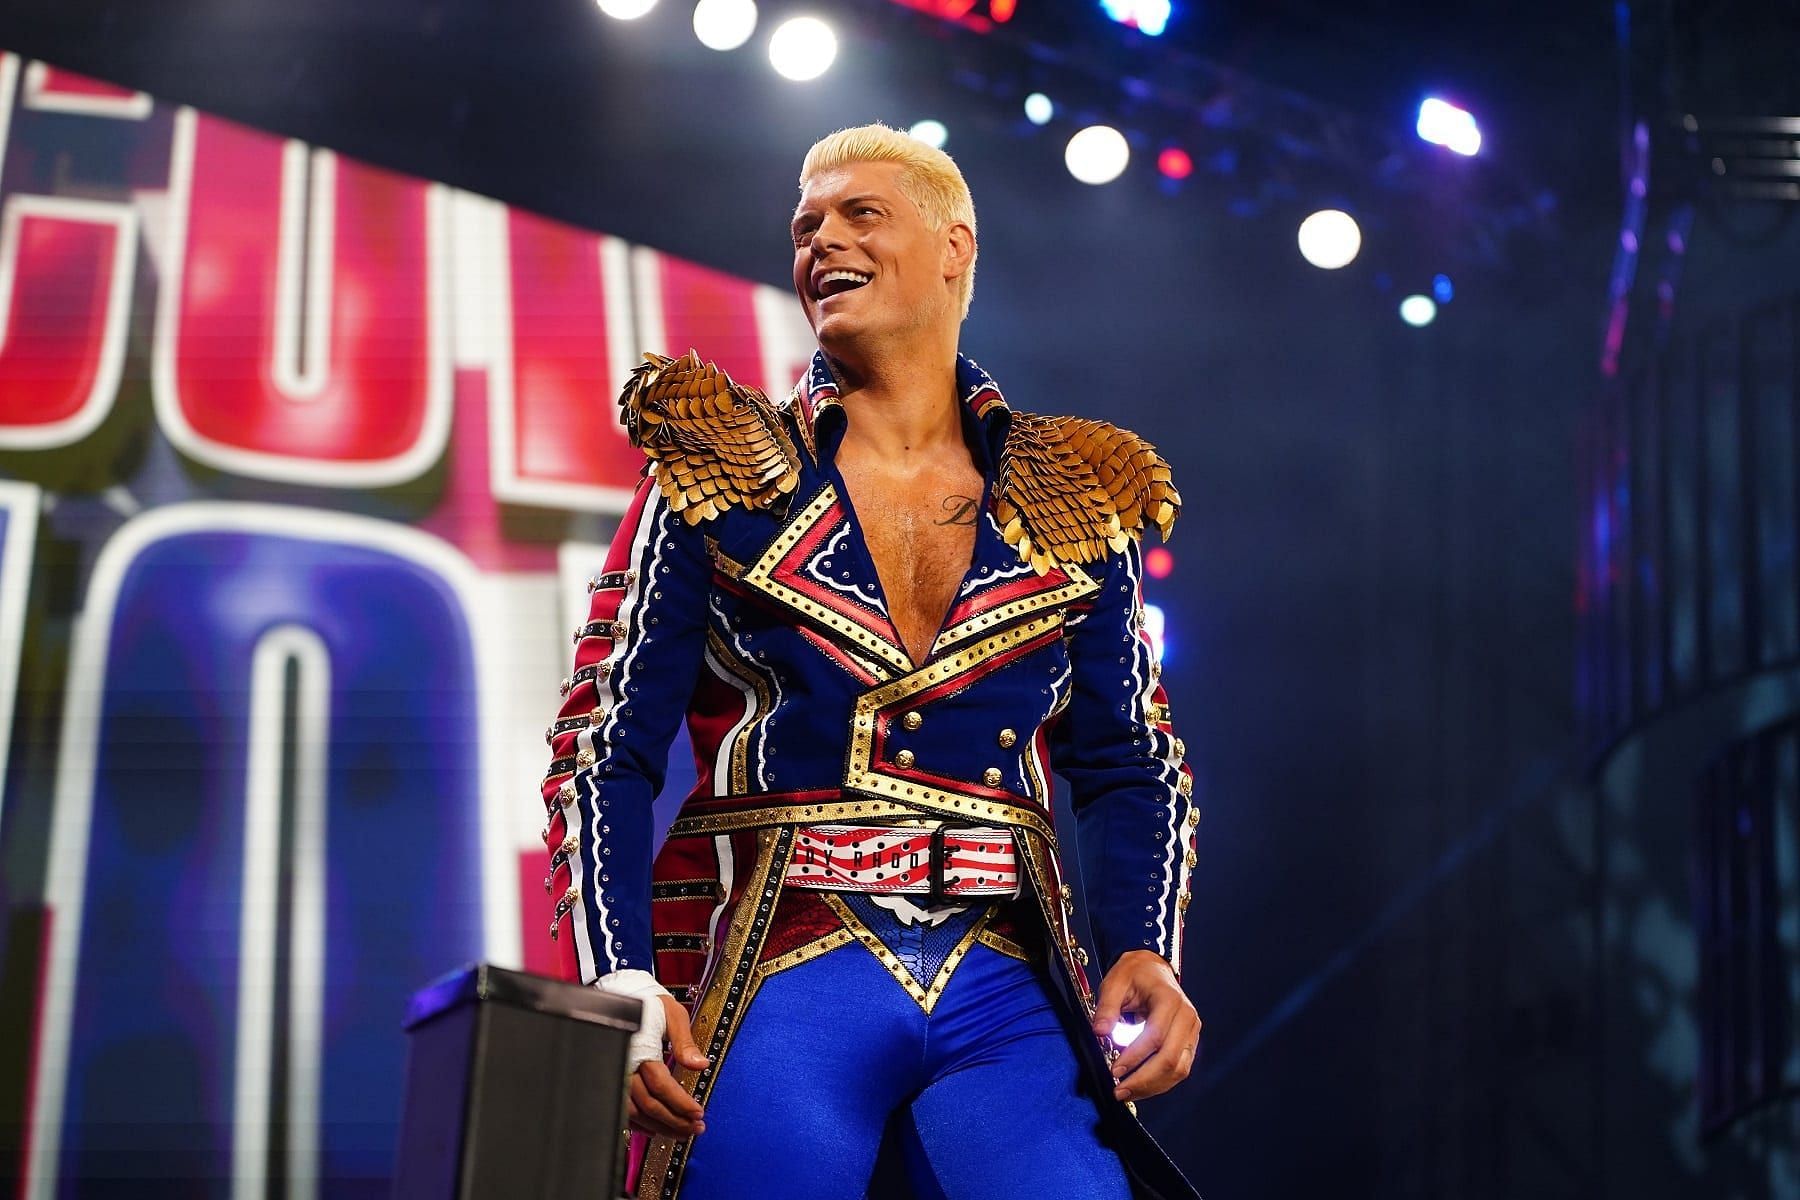 Cody Rhodes introduced Hook to AEW.